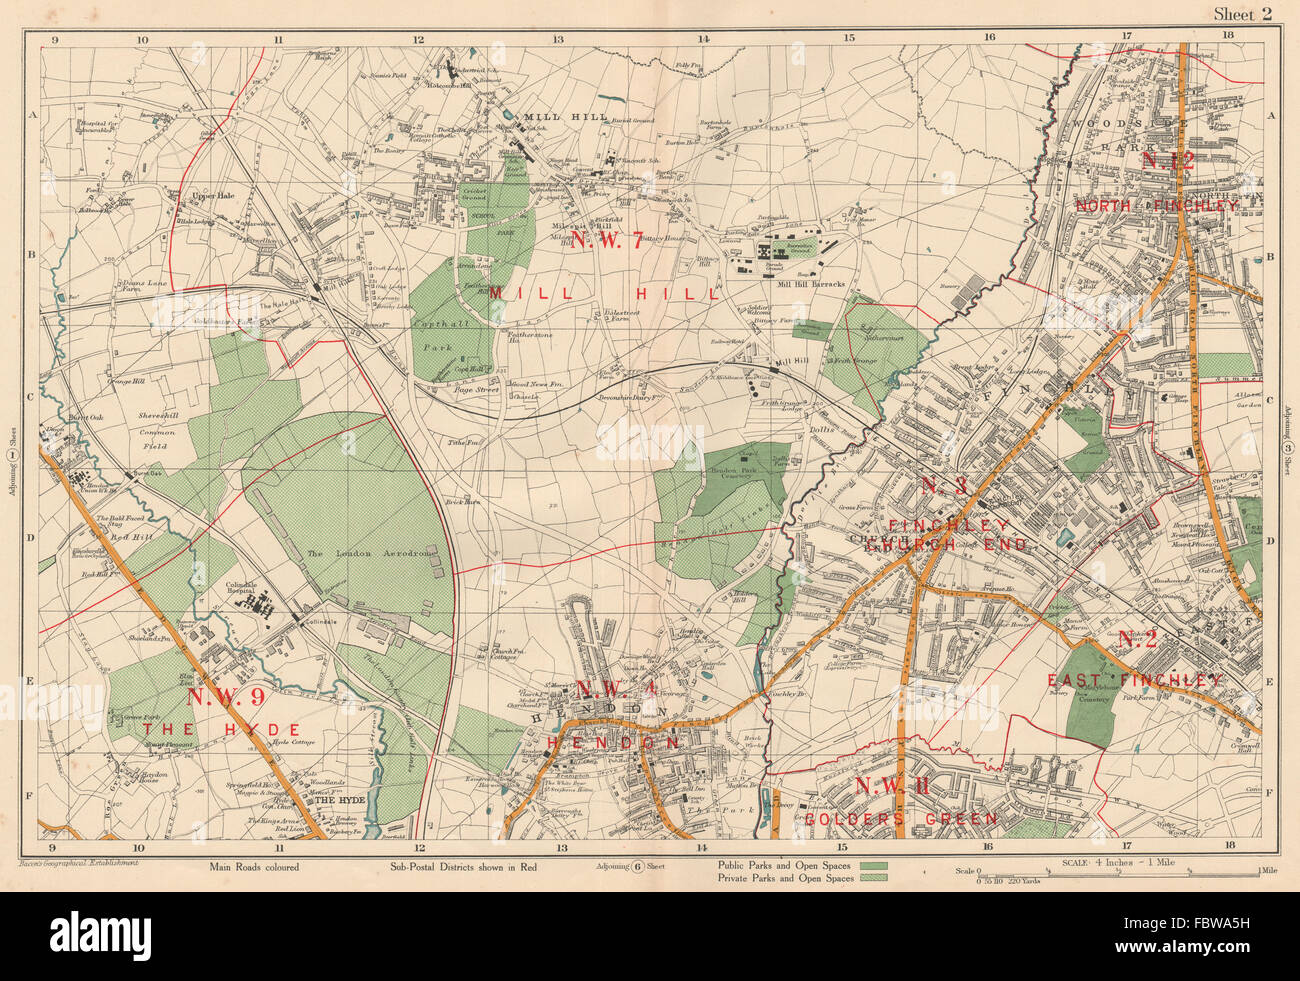 FINCHLEY/HENDON Mill Hill Hyde Golders Green Edgware Colindale. BACON, 1927 map Stock Photo